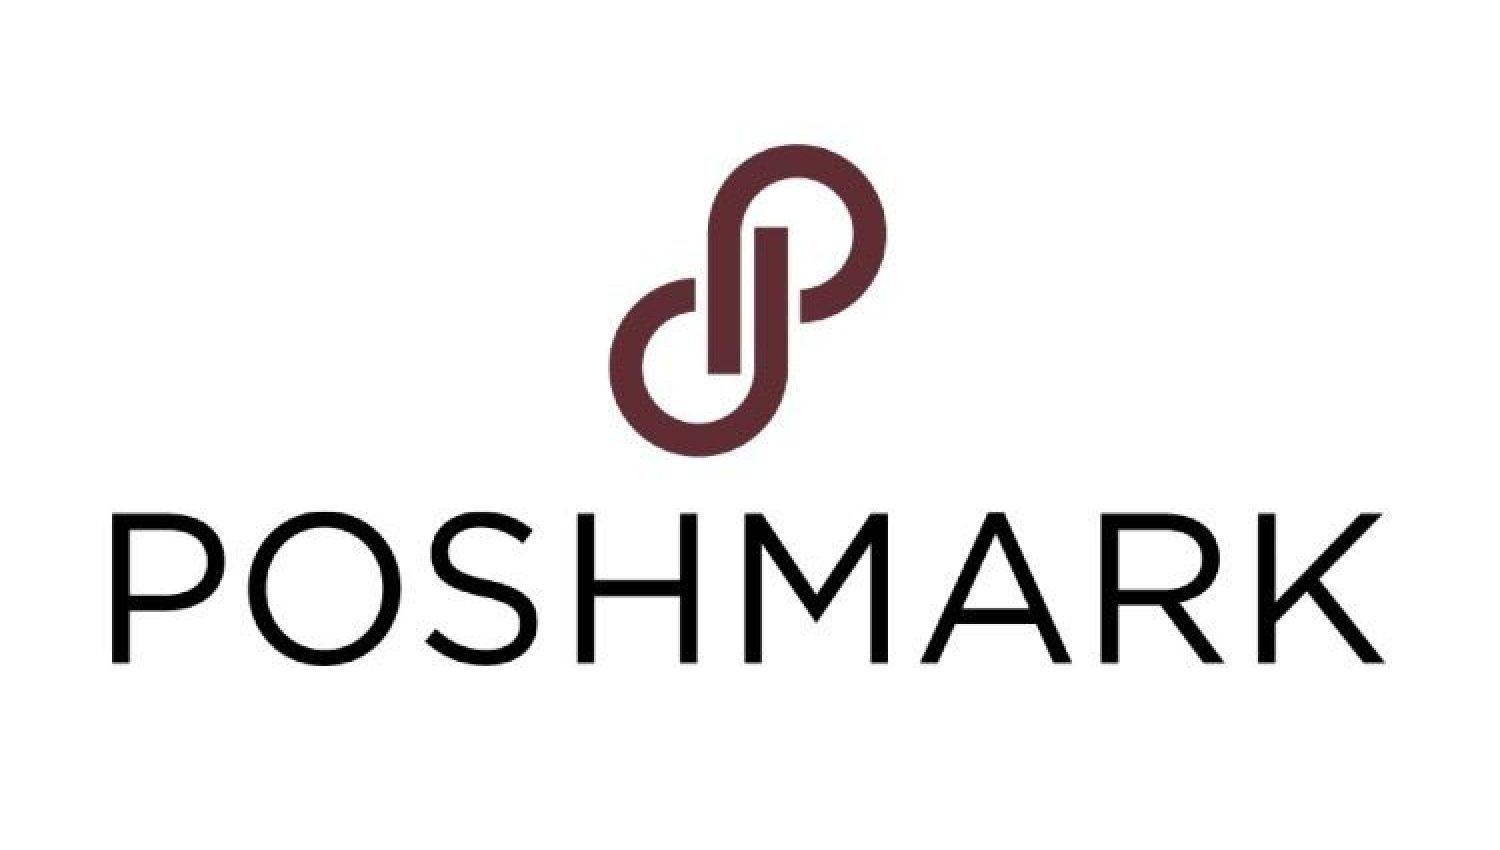 Poshmark Logo - How I Earned $000 By Cleaning Out My Closet